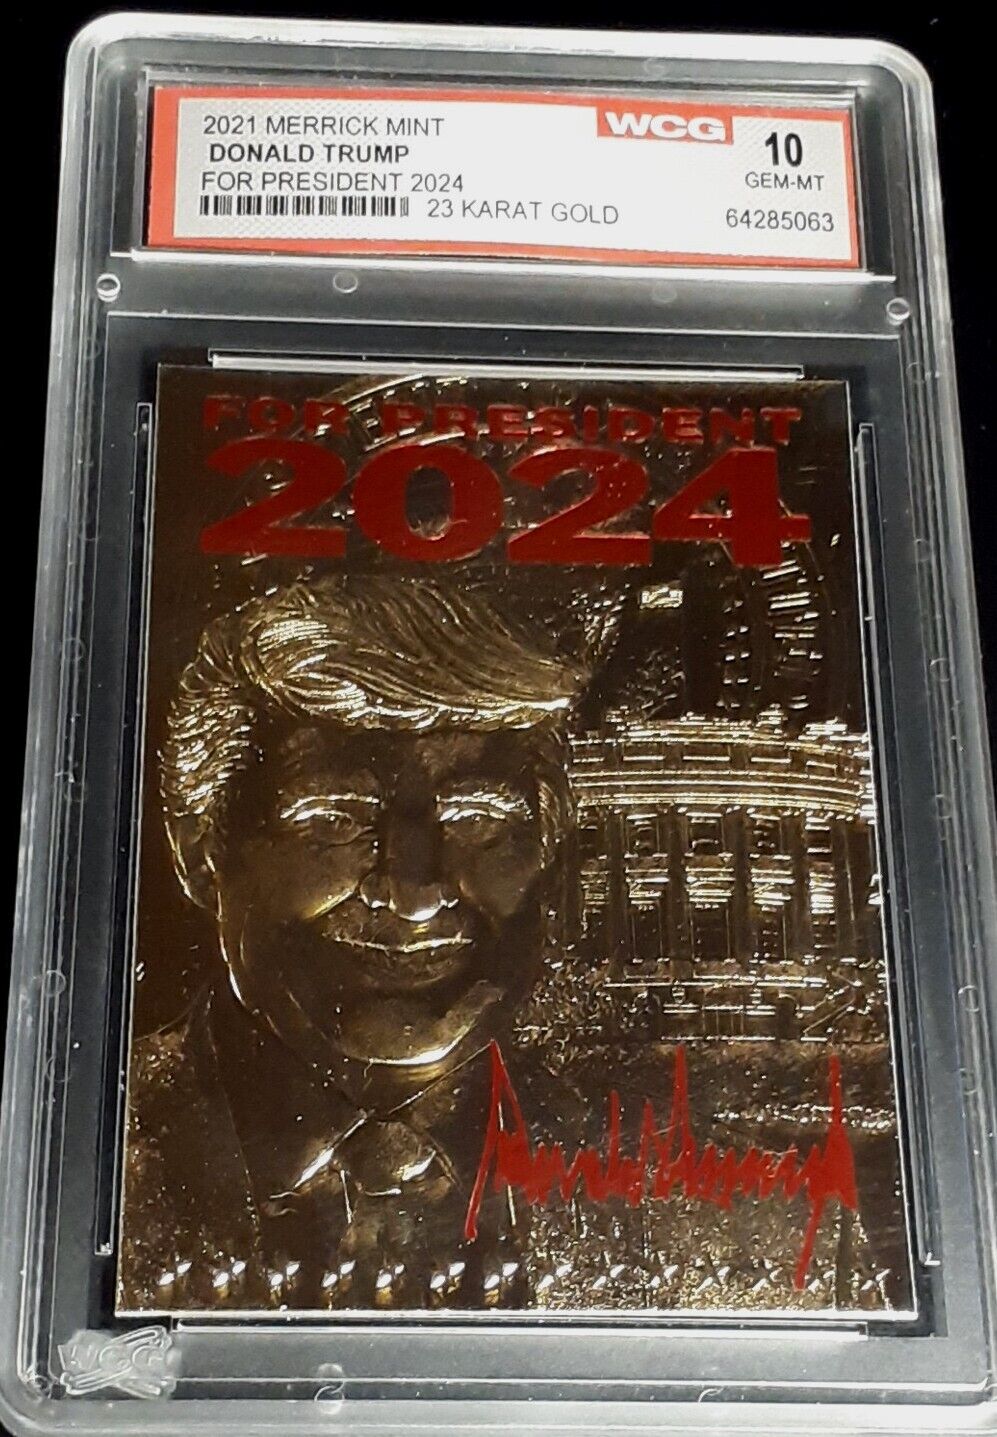 2021 DONALD TRUMP FOR PRESIDENT 2024 23 KARAT GOLD RED AUTO WCG 10